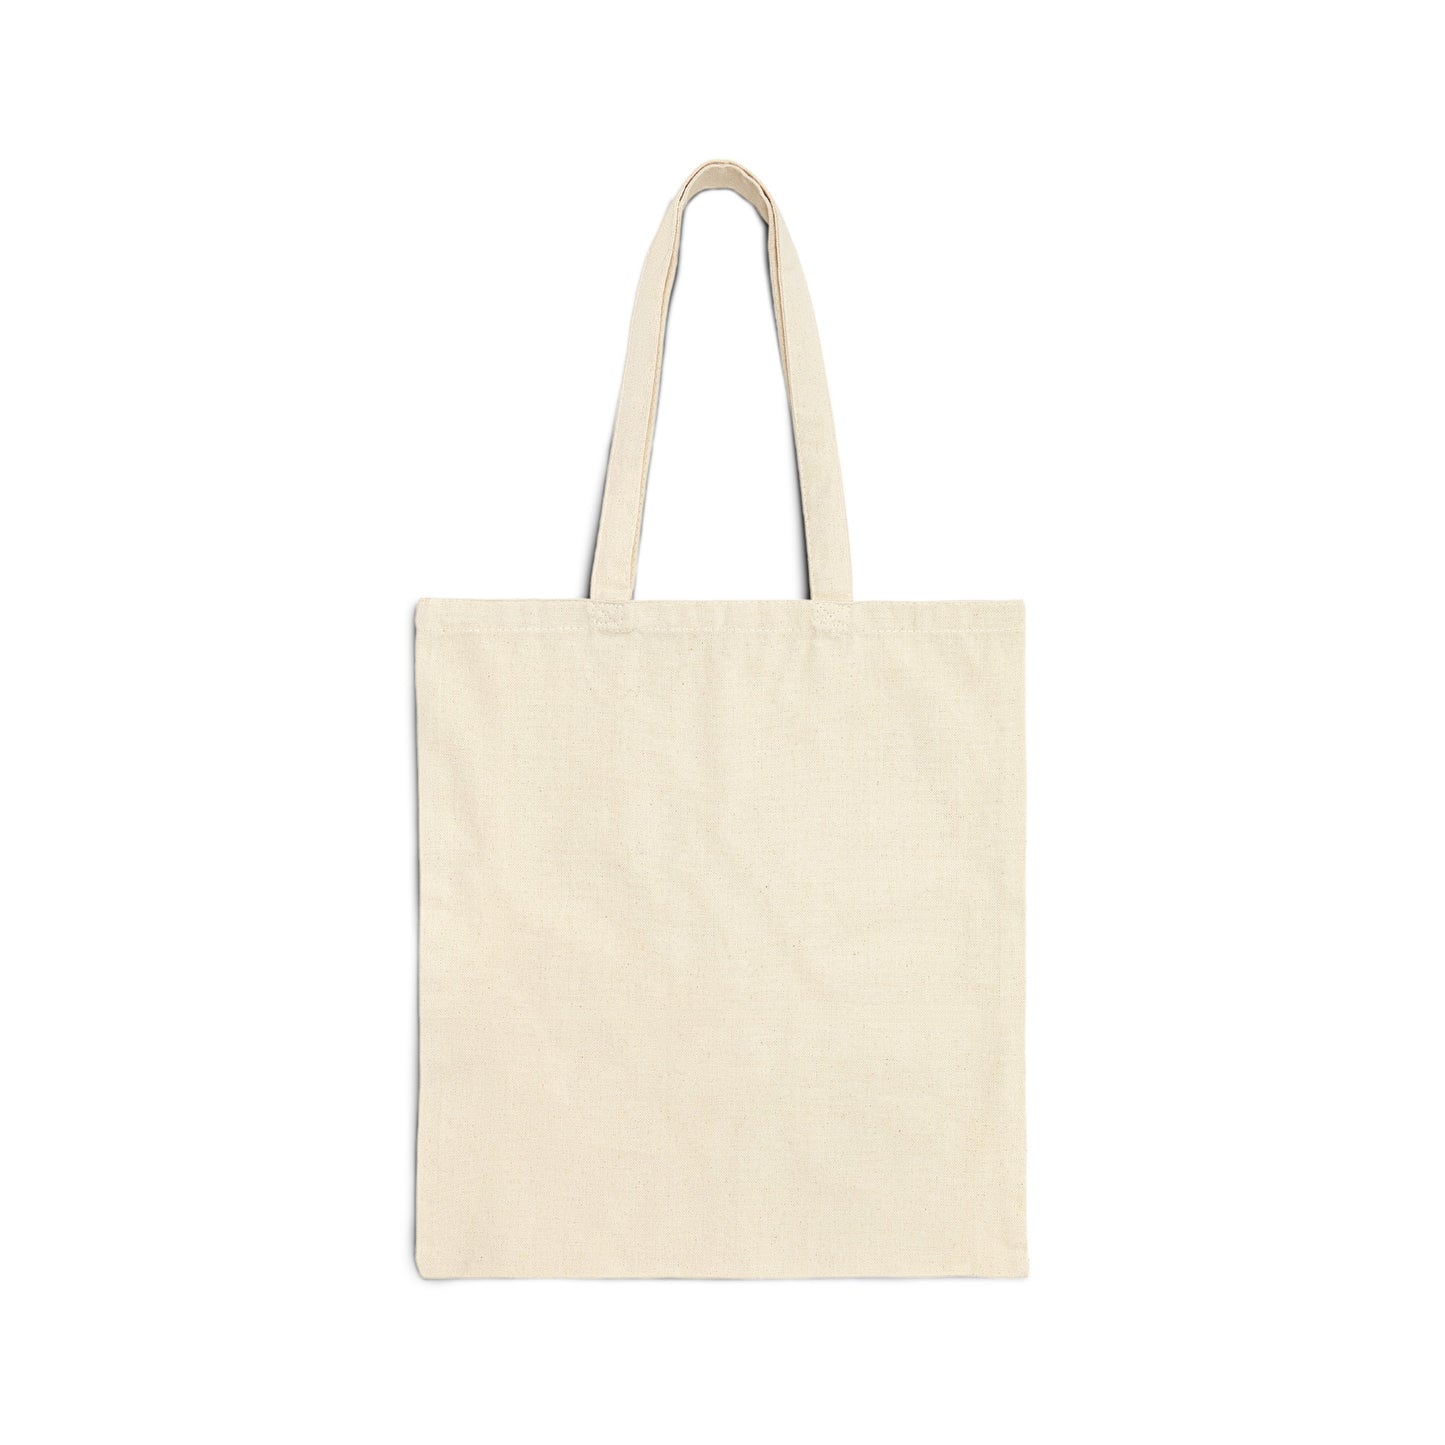 Panorama Cotton Canvas Tote Bag